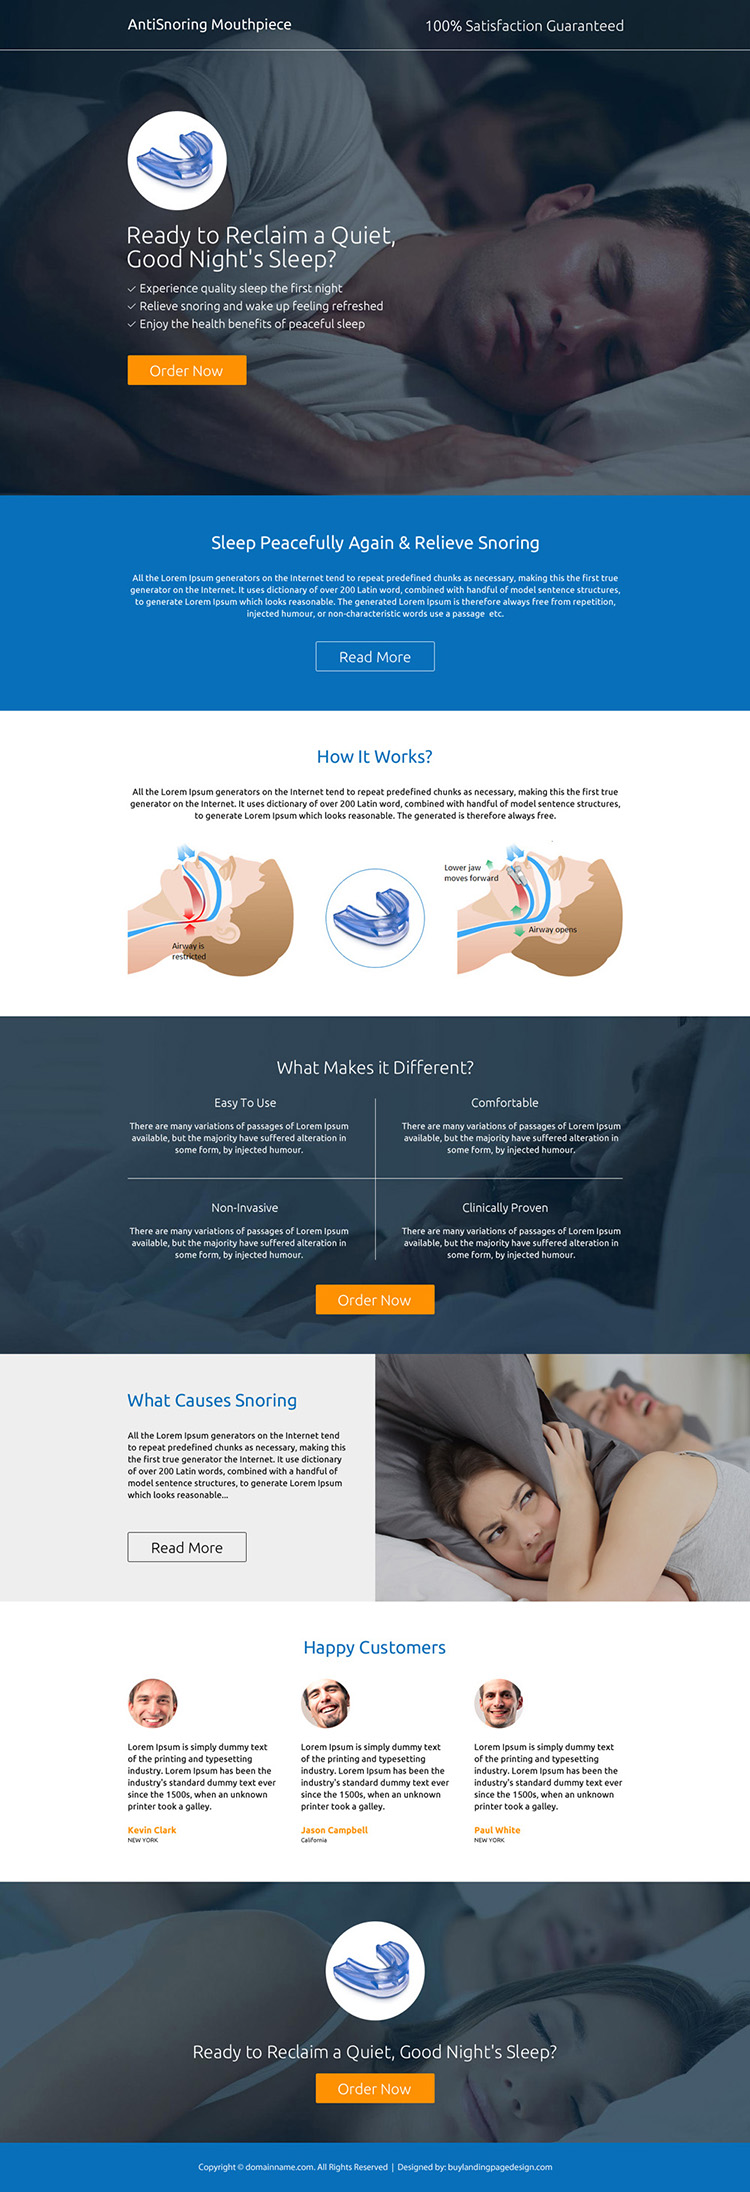 best anti snoring mouthpiece selling responsive landing page